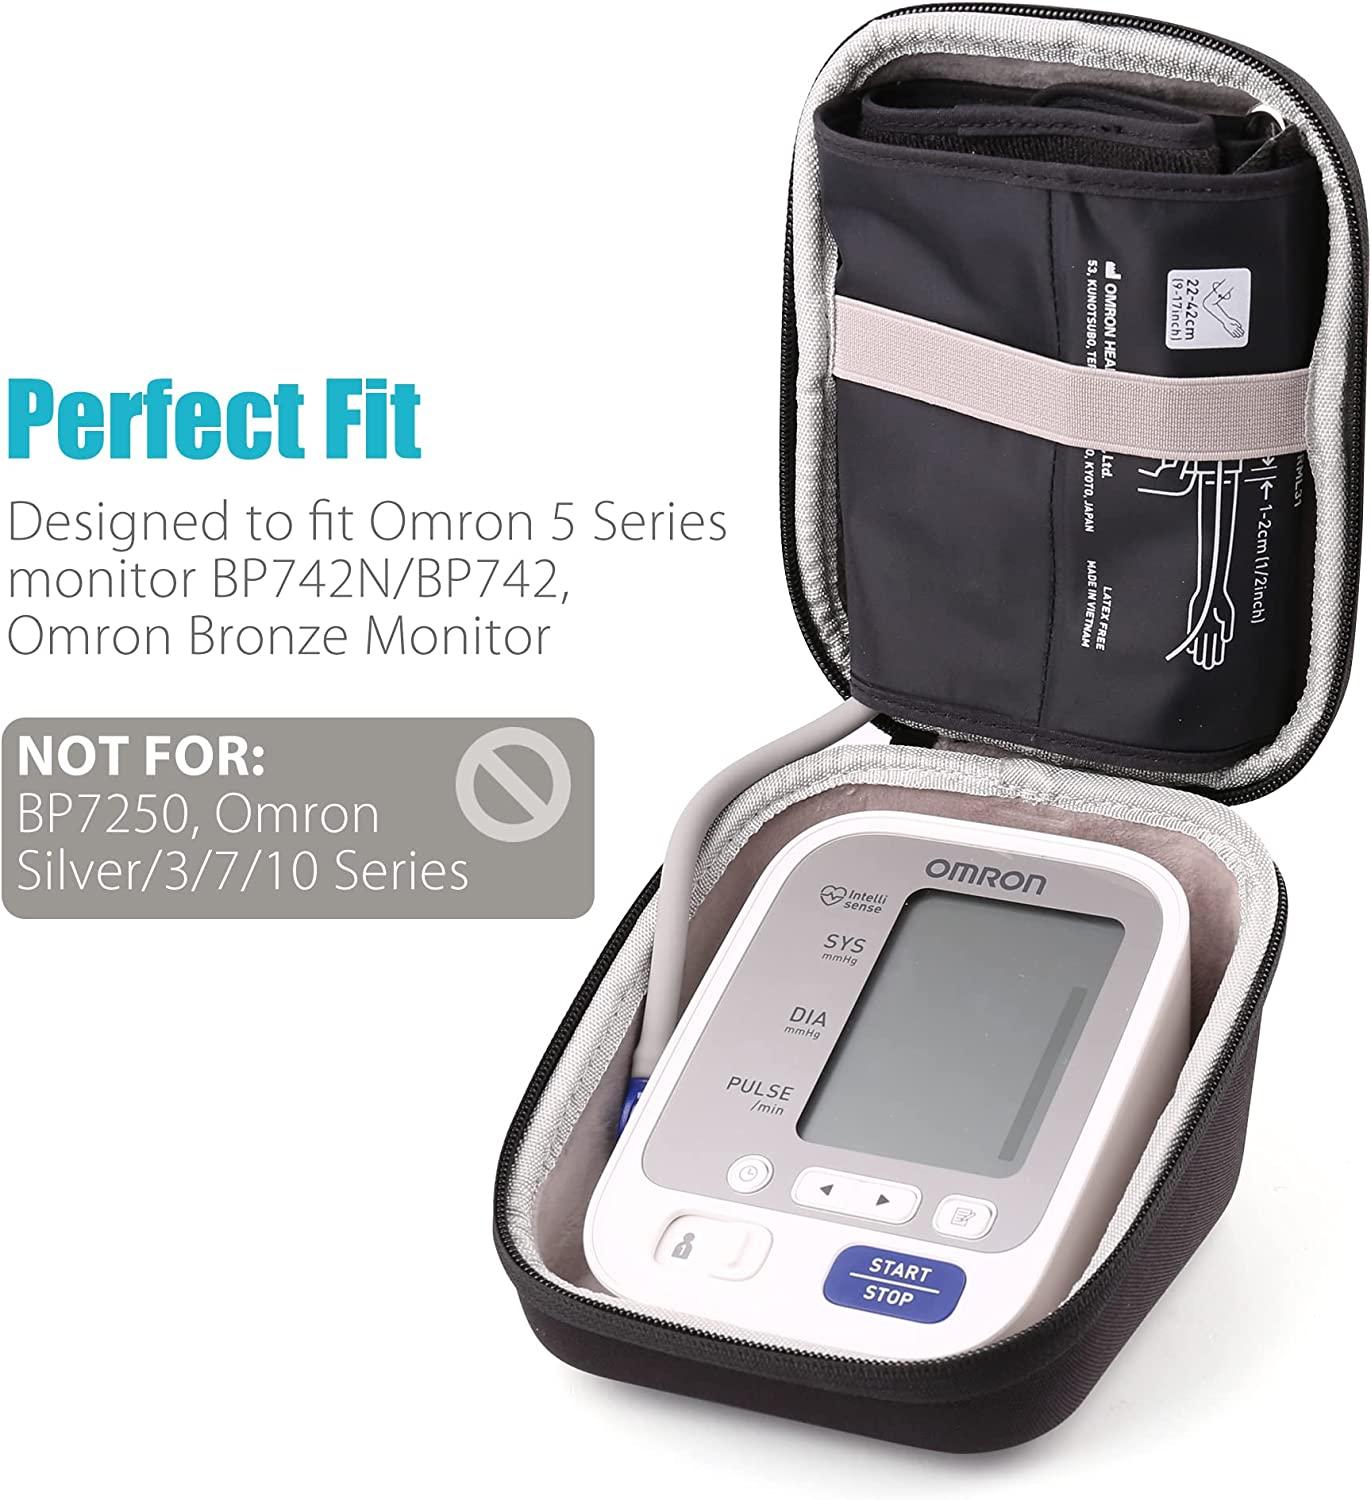 TUDIA Eva Empty Case Compatible with Omron BP7100 3 Series, Omron Bp742n 5 Series / Model 7200, Hard Storage Travel Case for Upper Arm Blood Pressure